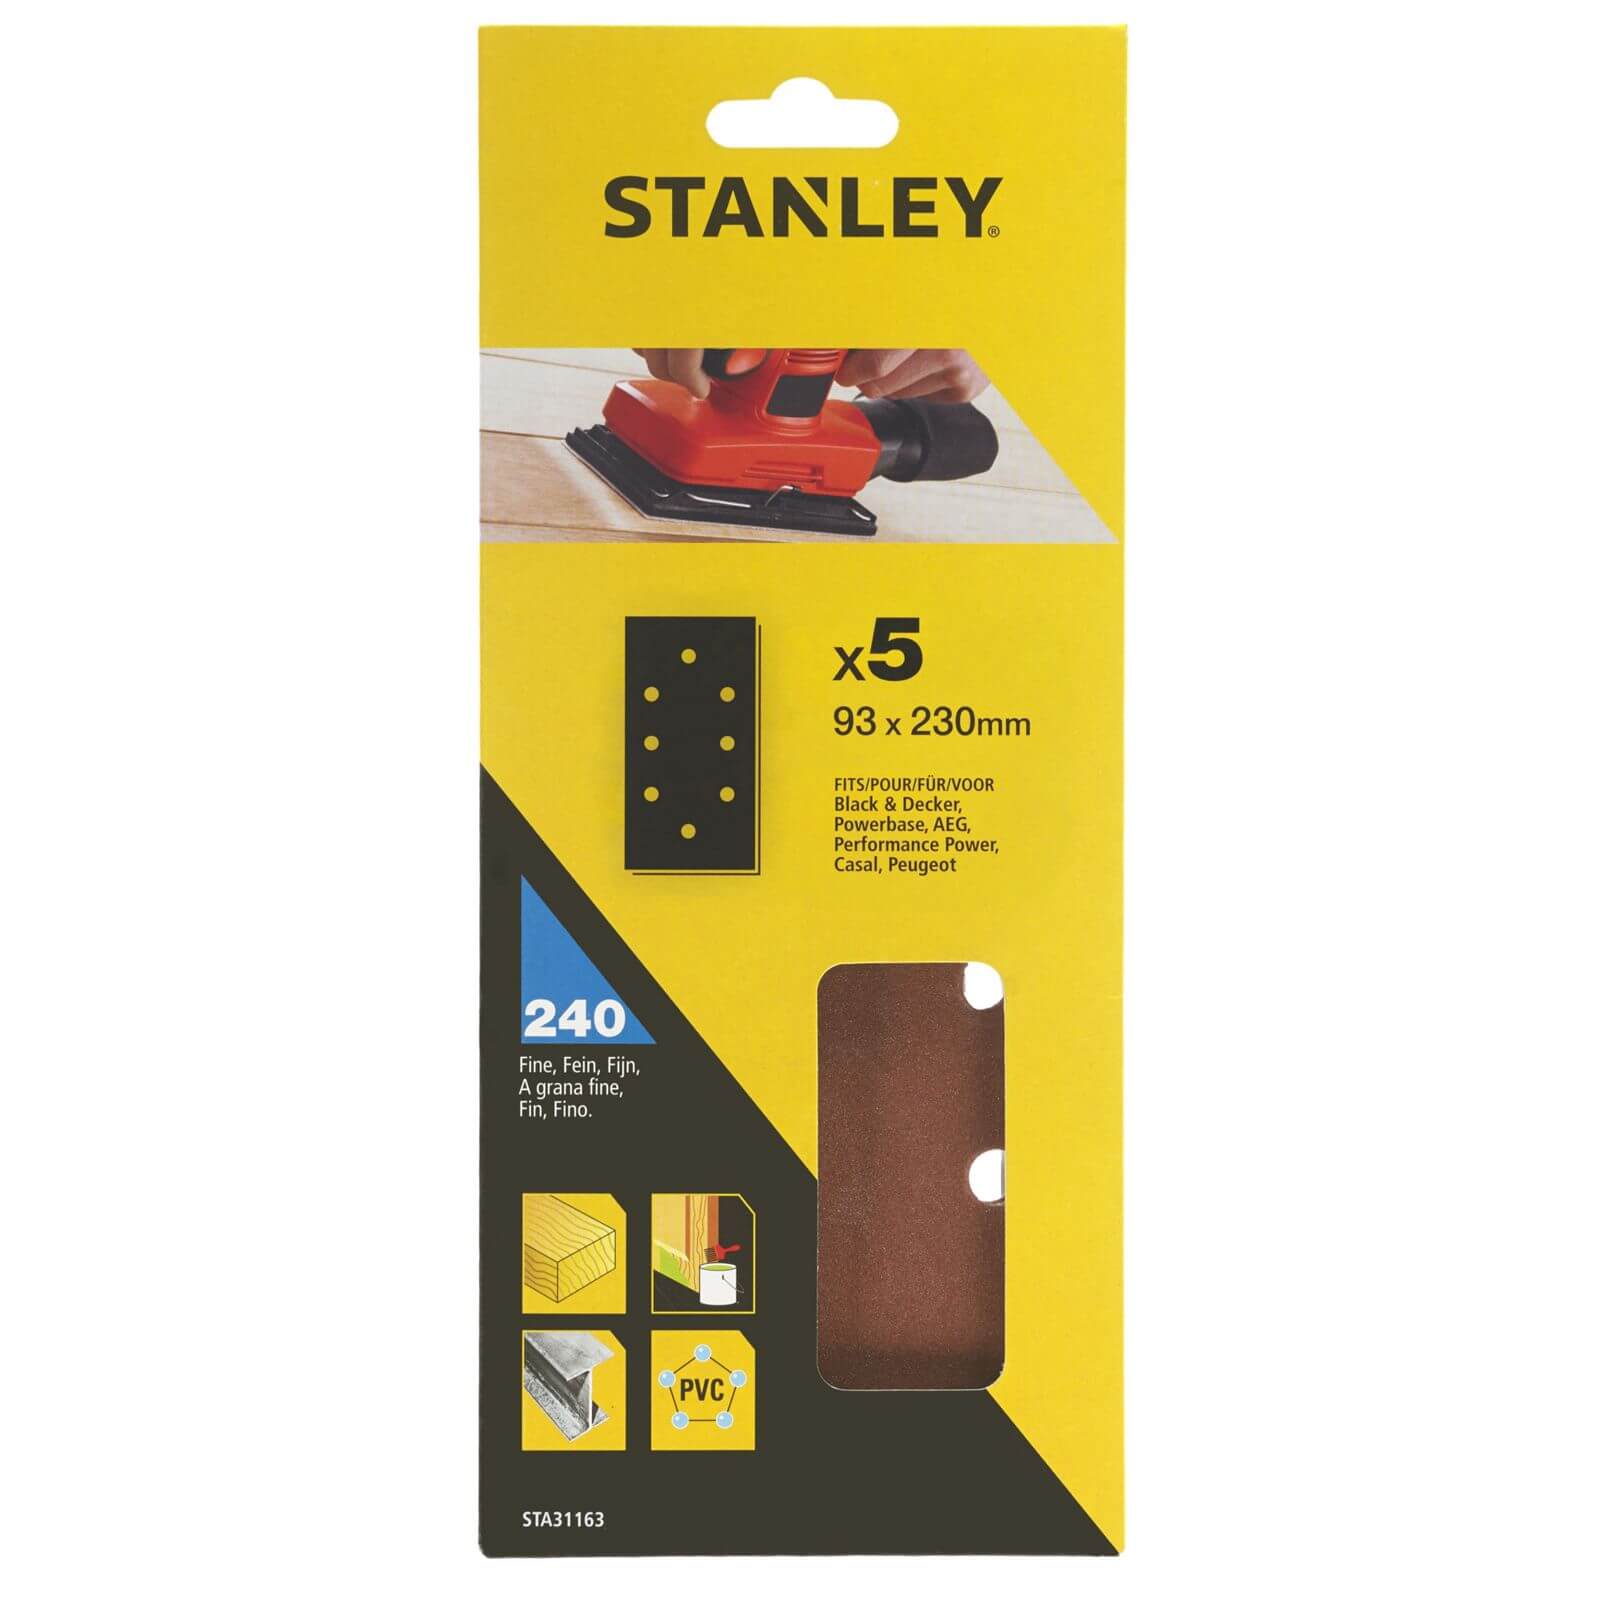 Stanley 1/3 Sheet Sander Punched Wire Clip 240G Sanding Sheets - STA31163-XJ